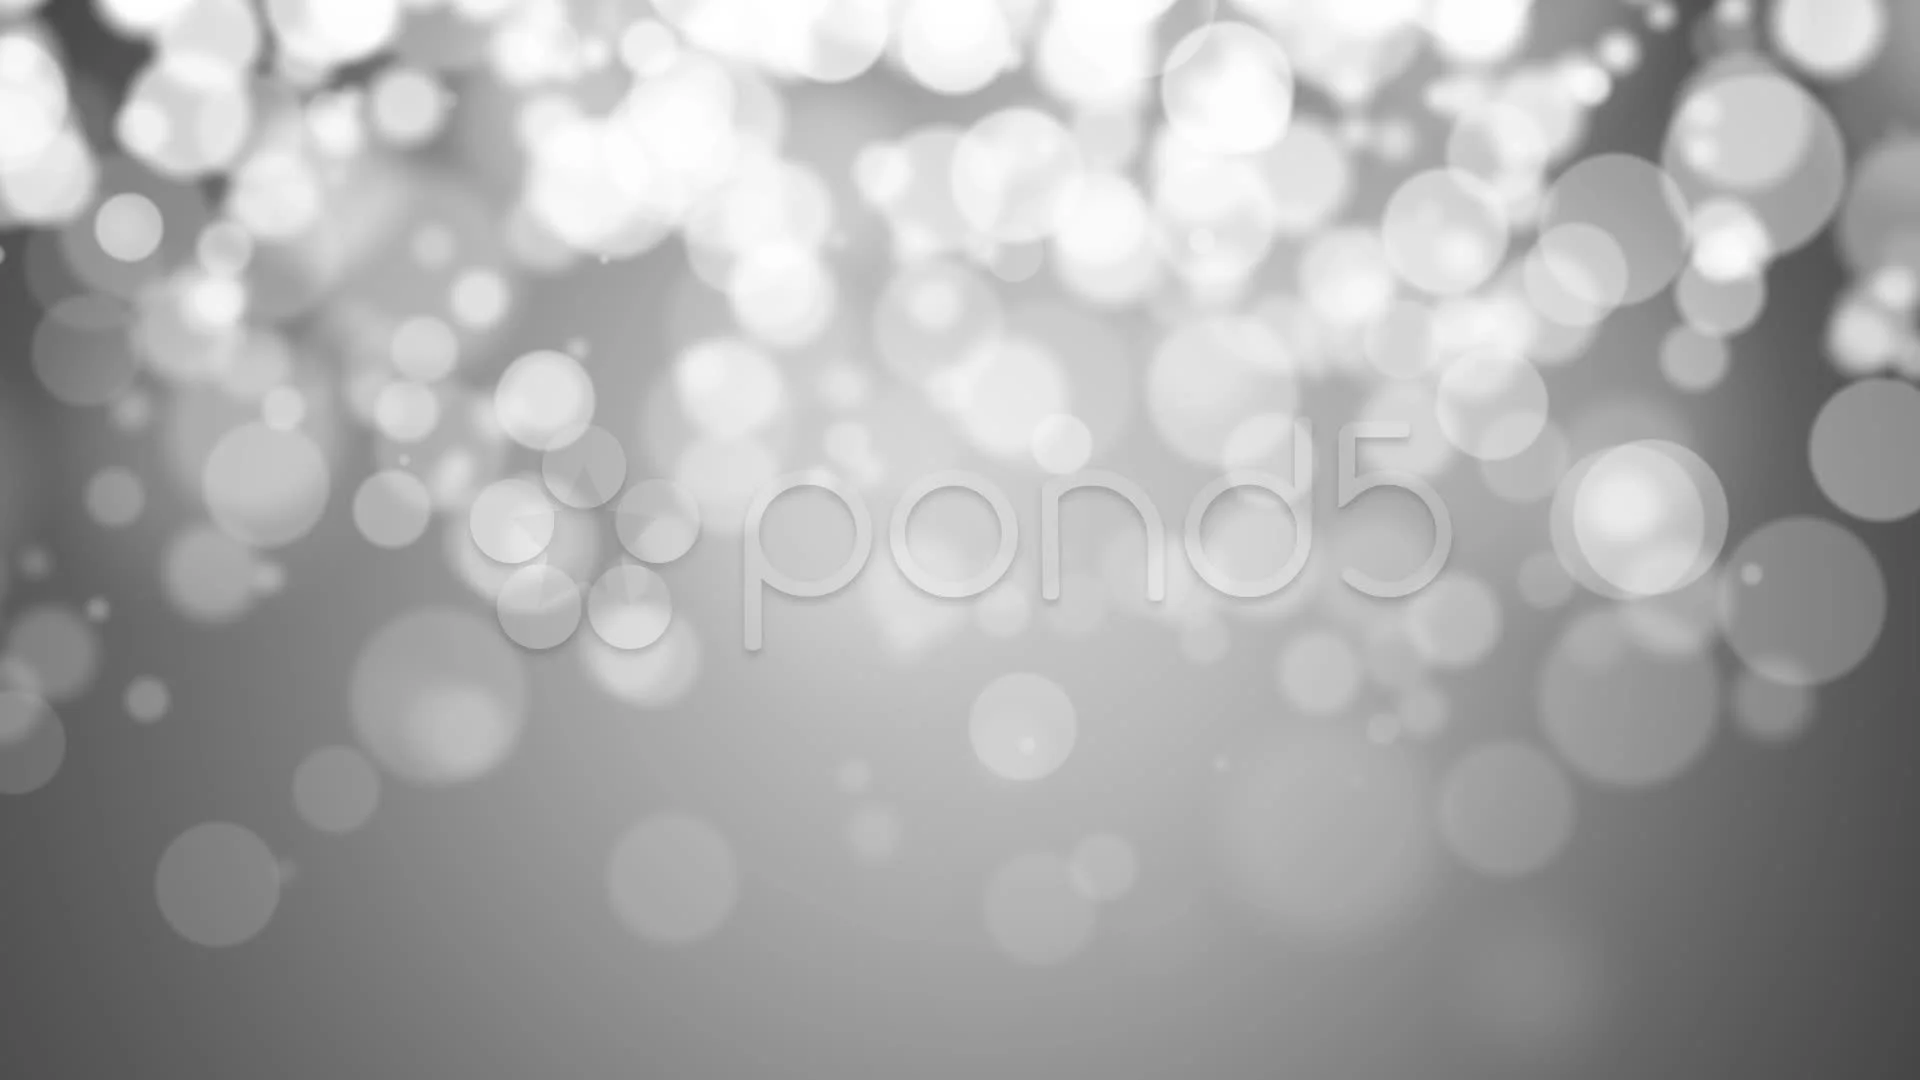 silver wedding backgrounds